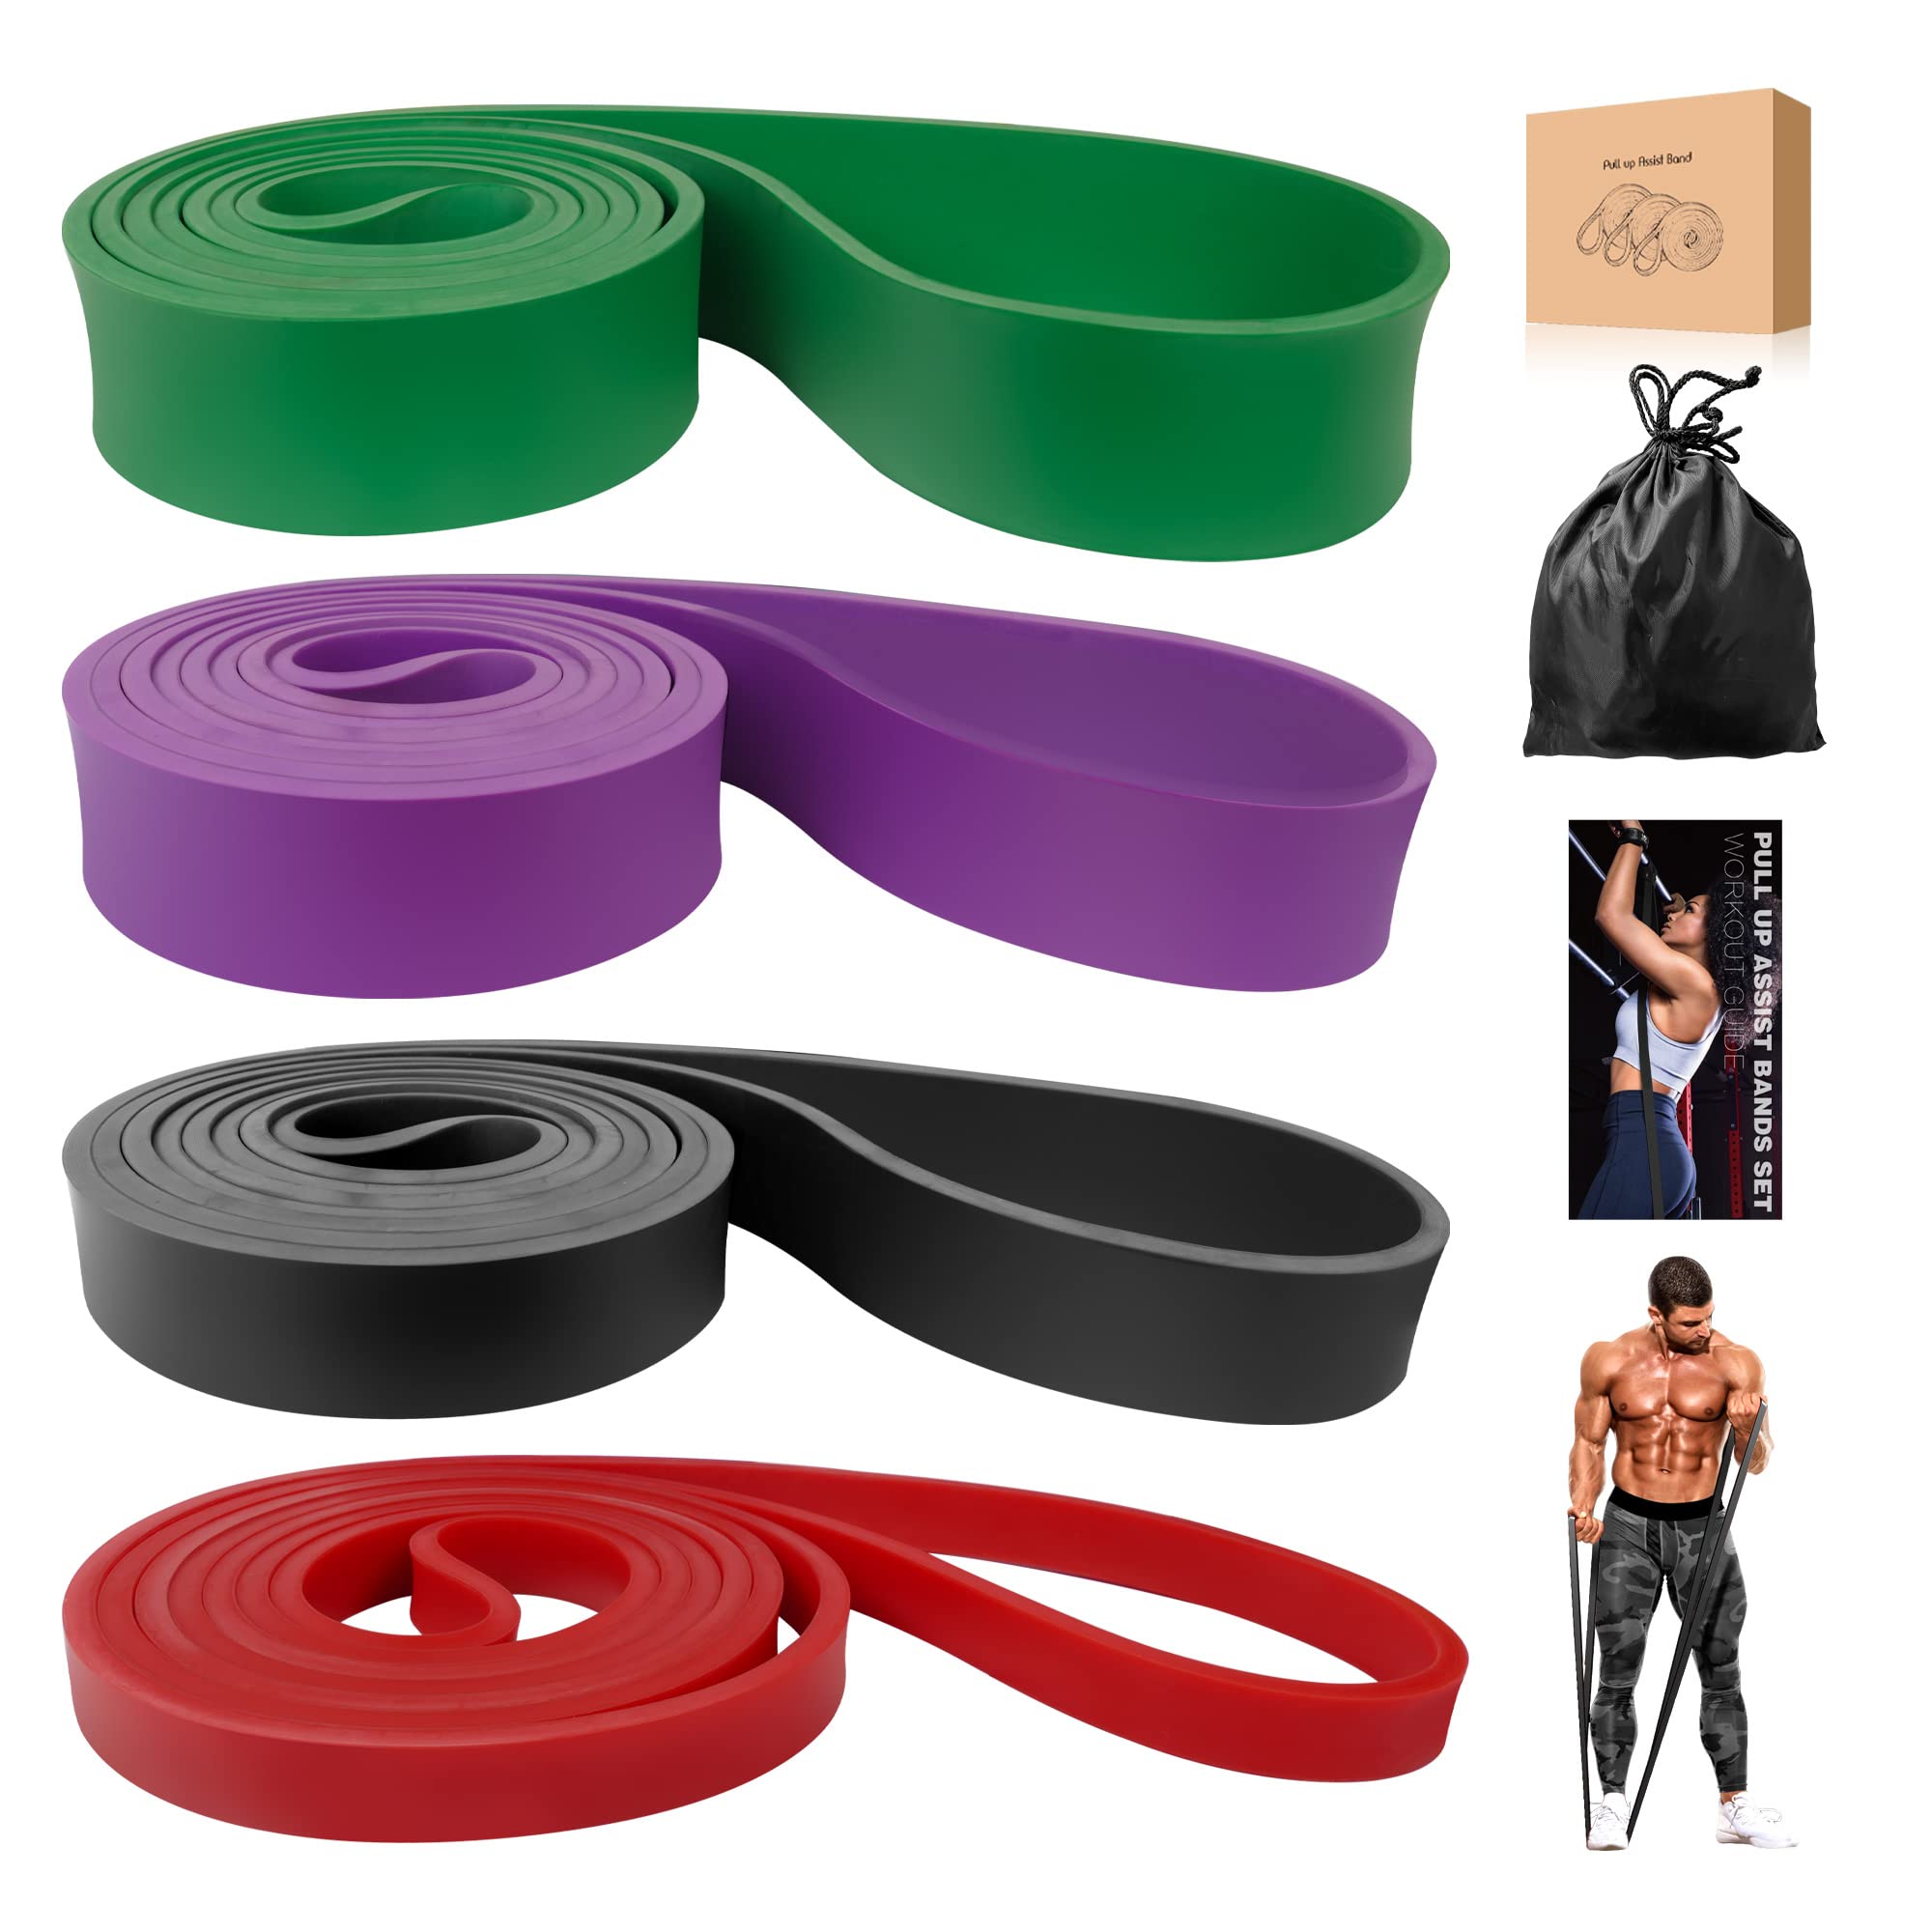 KAREEME Resistance Bands Pull Up Assist Bands Set, 4 Different levels Exercise Workout Bands for Fitness, Strength Training, Powerlifting, Pull Up Assist Bands for Men and Women